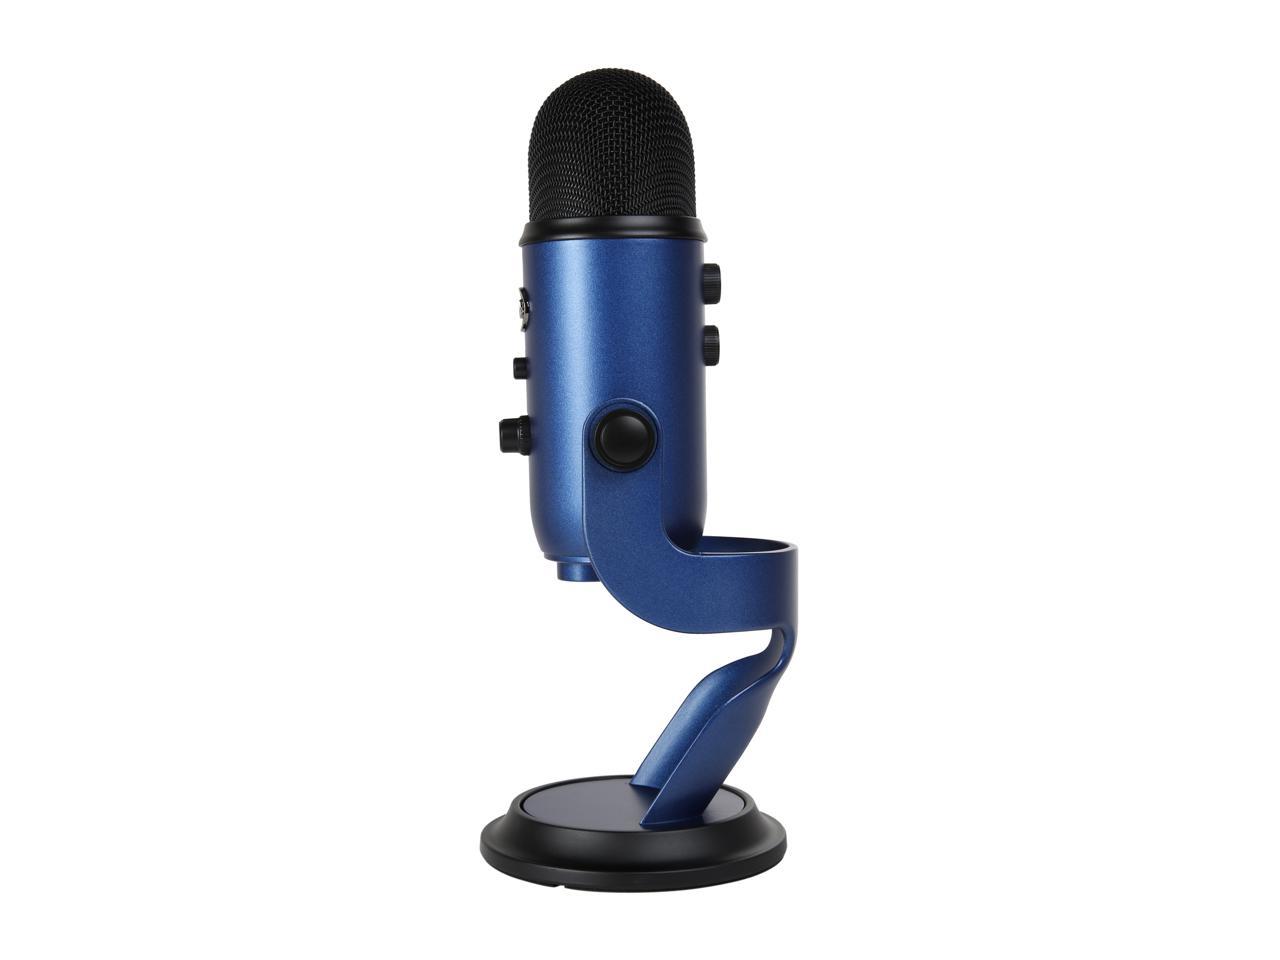 Blue Yeti USB Microphone for PC, Mac, Gaming, Recording, Streaming, Podcasting, Studio and Computer Condenser Mic with Blue VO!CE effects, 4 Pickup Patterns, Plug and Play – Midnight Blue - image 3 of 7